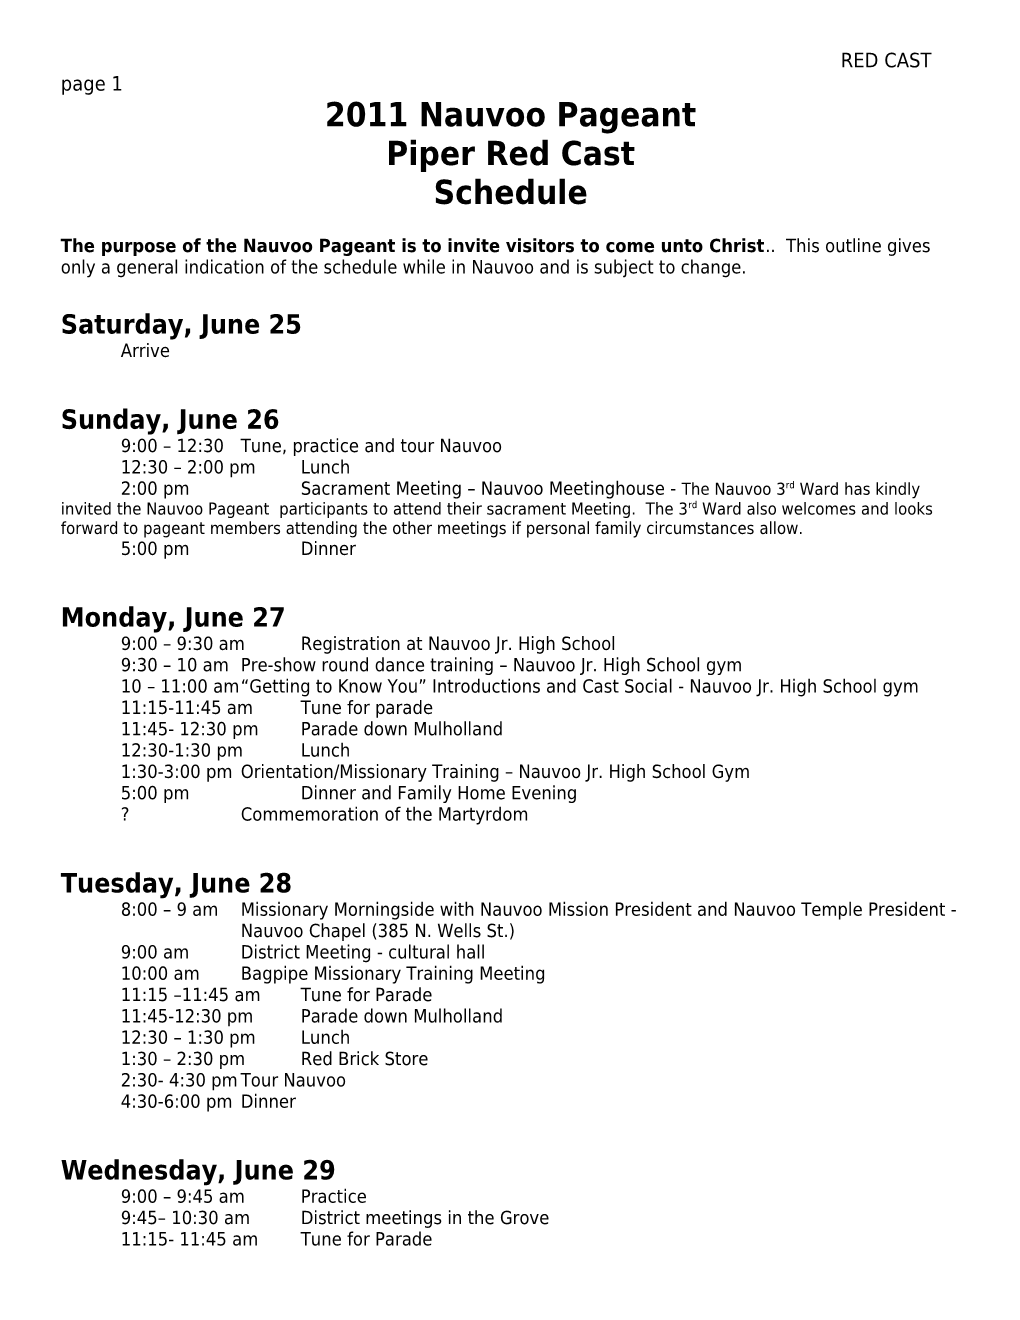 2006 Nauvoo Pageant Schedule